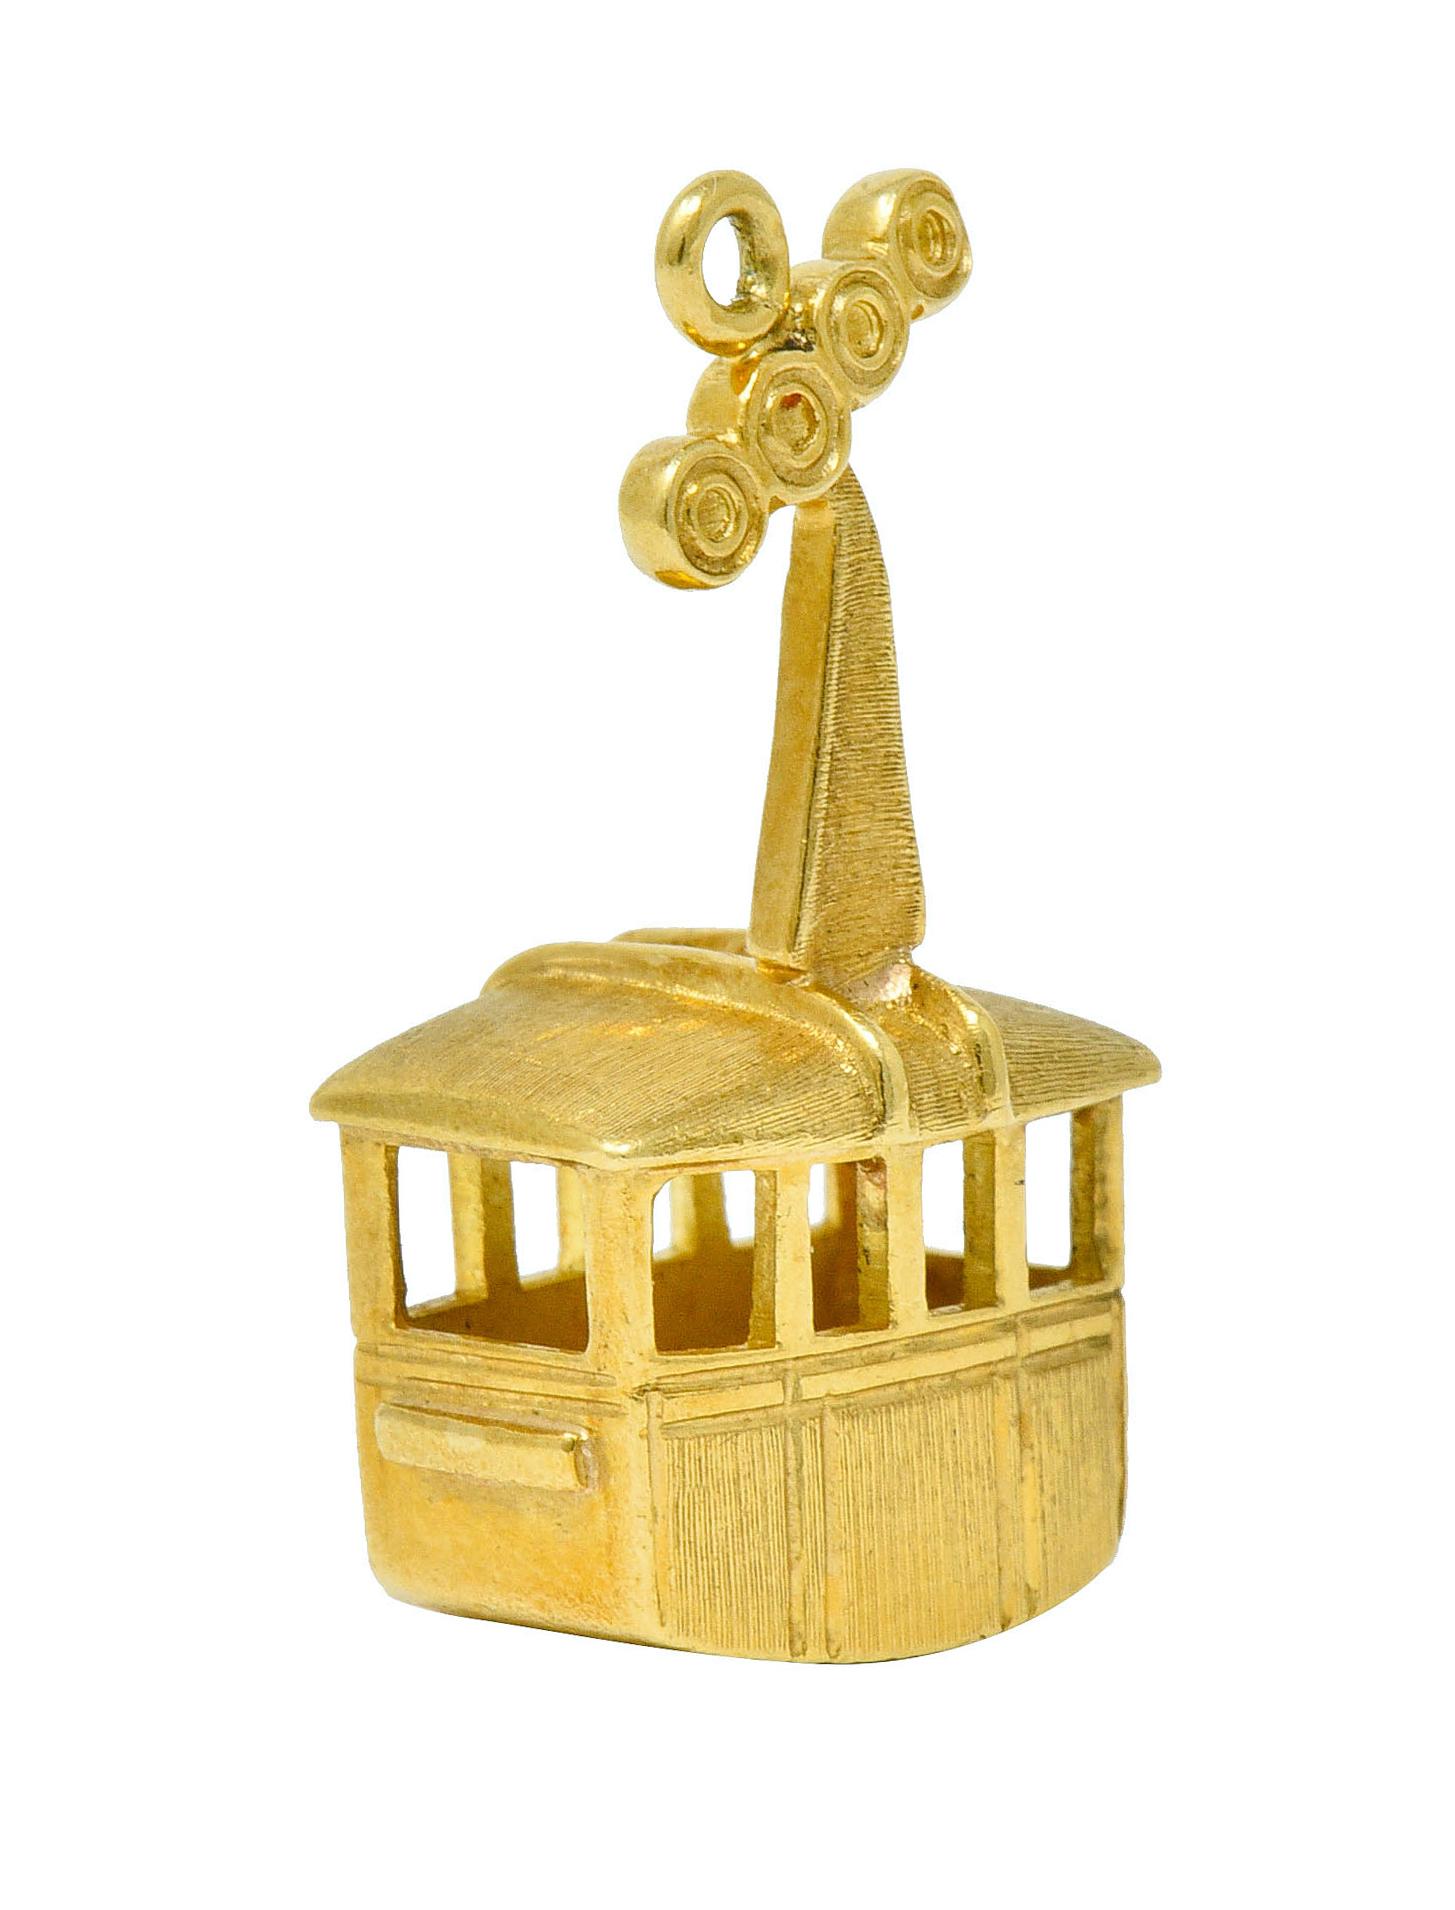 Aerial cable car charm is a dimensional rectangular form

With pierced out windows, a strong brushed finish, and topped by pulley wheels

Tested as 18 karat gold

Circa: 1960s

Measures: 1/2 x 1 1/8 inches

Total weight: 5.5 grams

Snowy. Alpine.